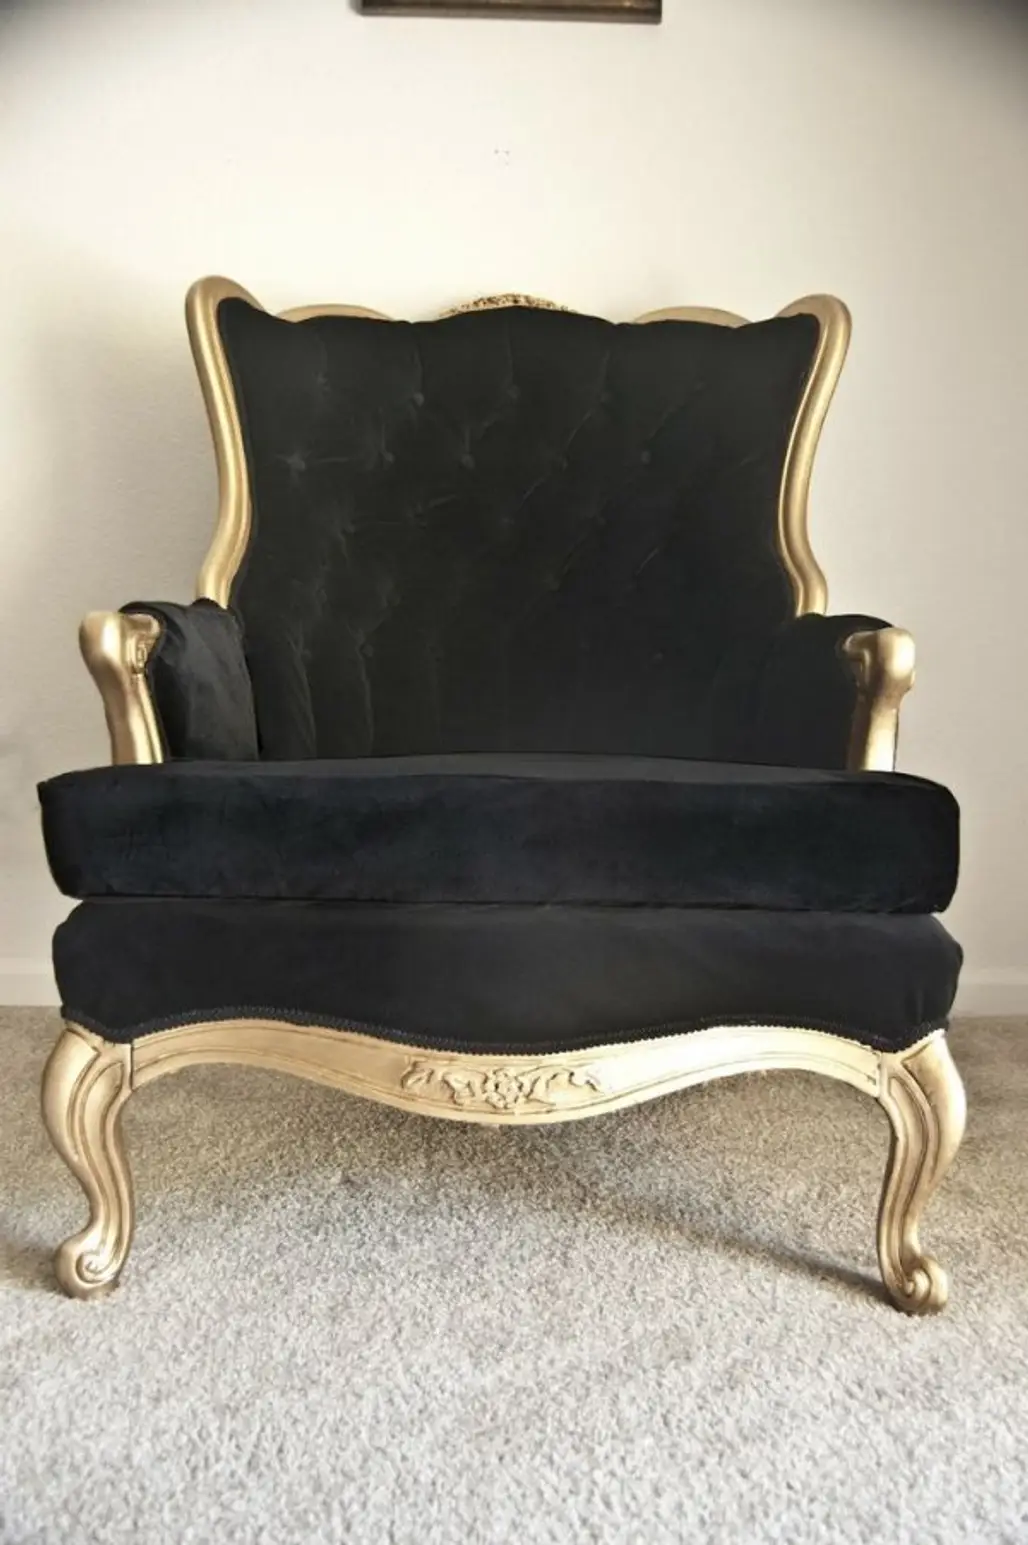 Doesn't Every Princess Need a Gold Leaf Throne?